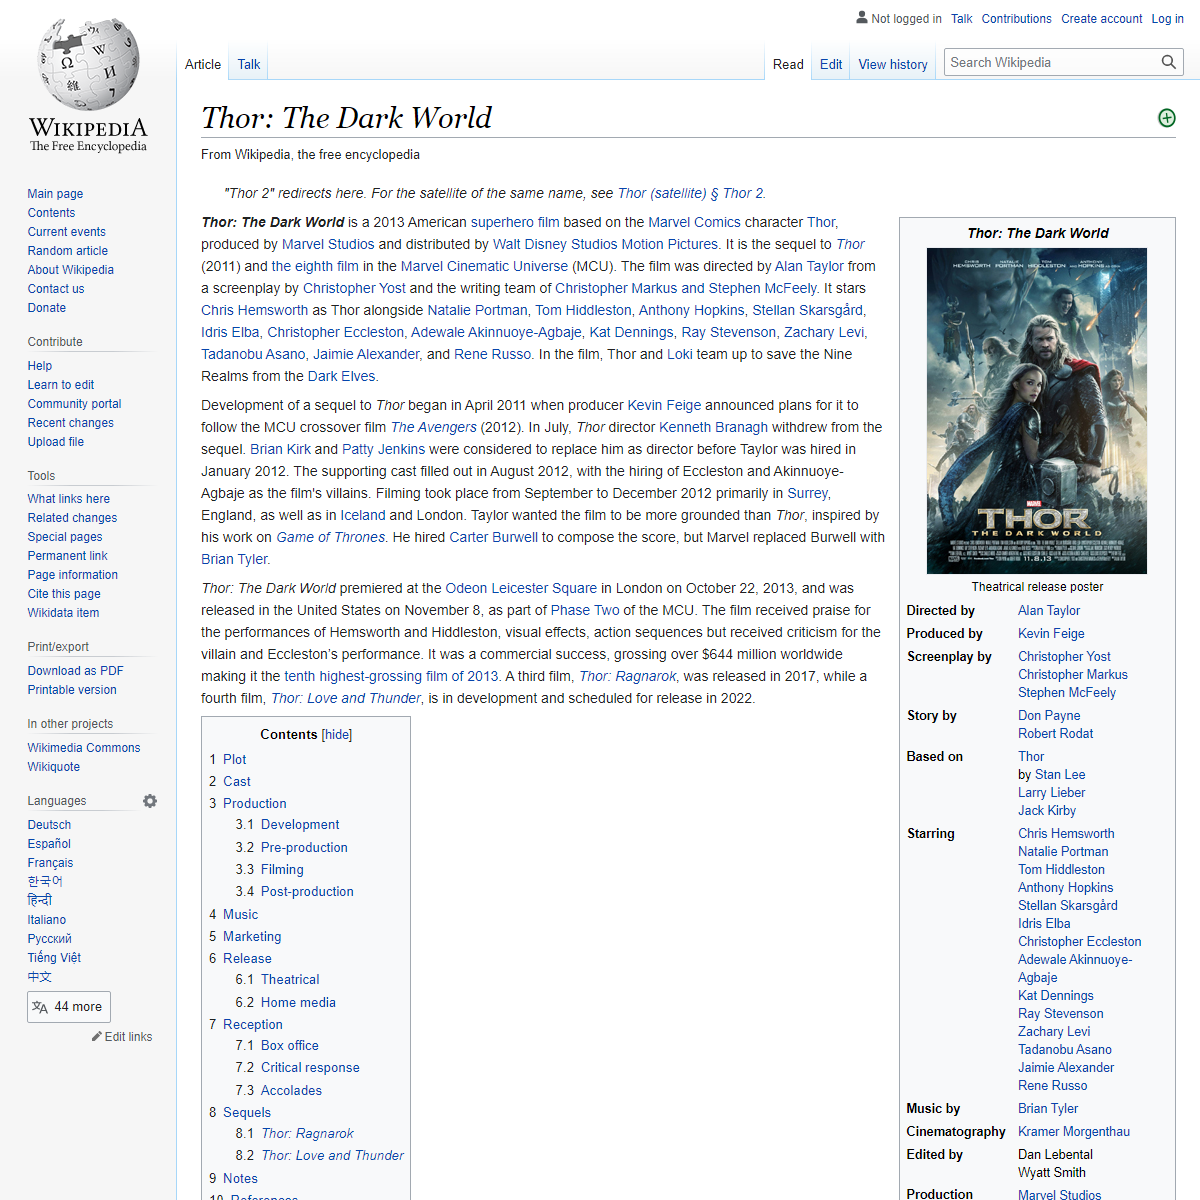 A complete backup of https://en.wikipedia.org/wiki/Thor:_The_Dark_World